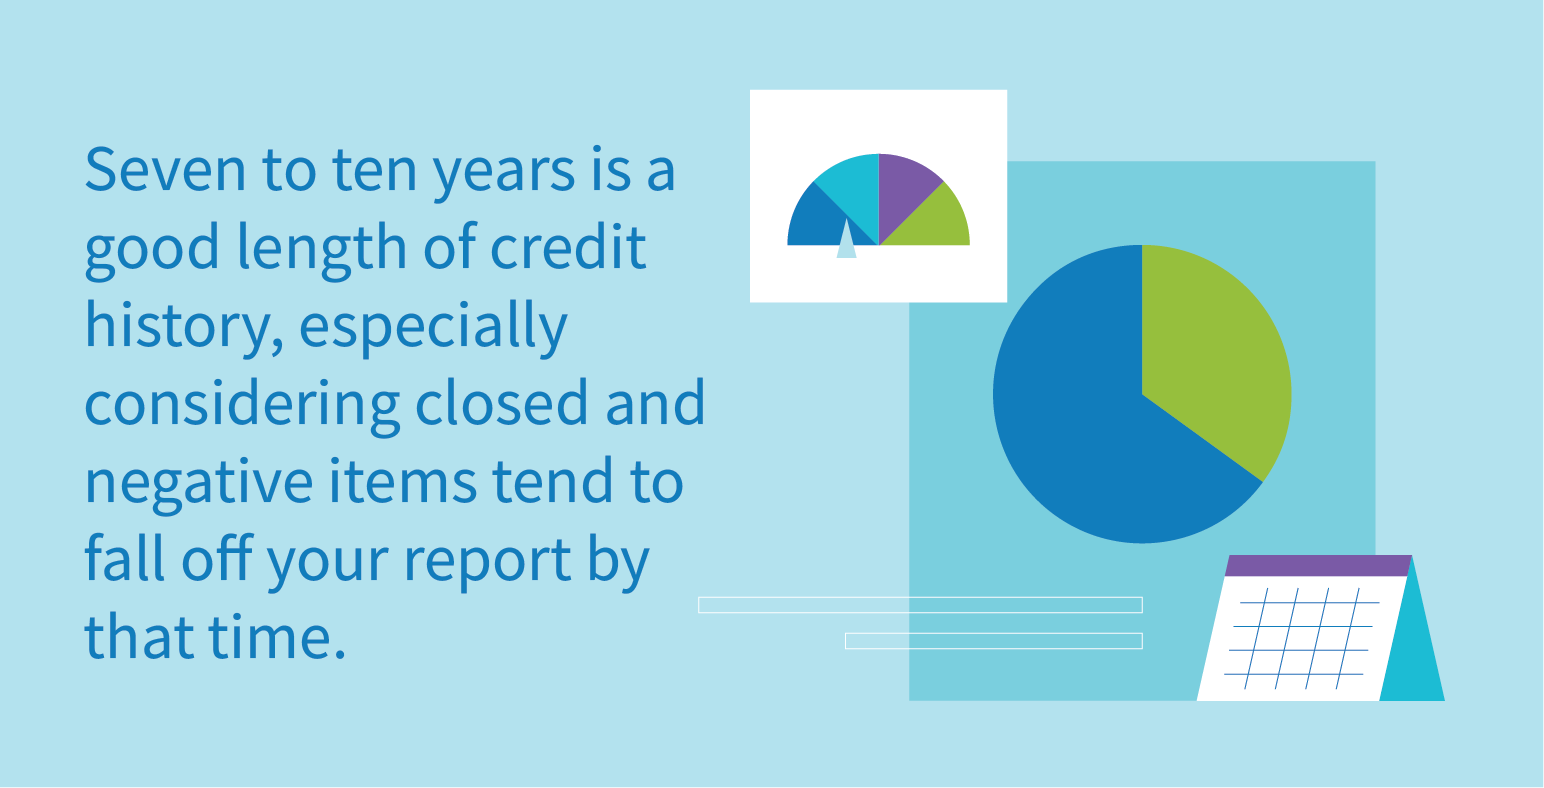 Seven to ten years is a good length of credit history, especially considering closed and negative items tend to fall off your report by that time.